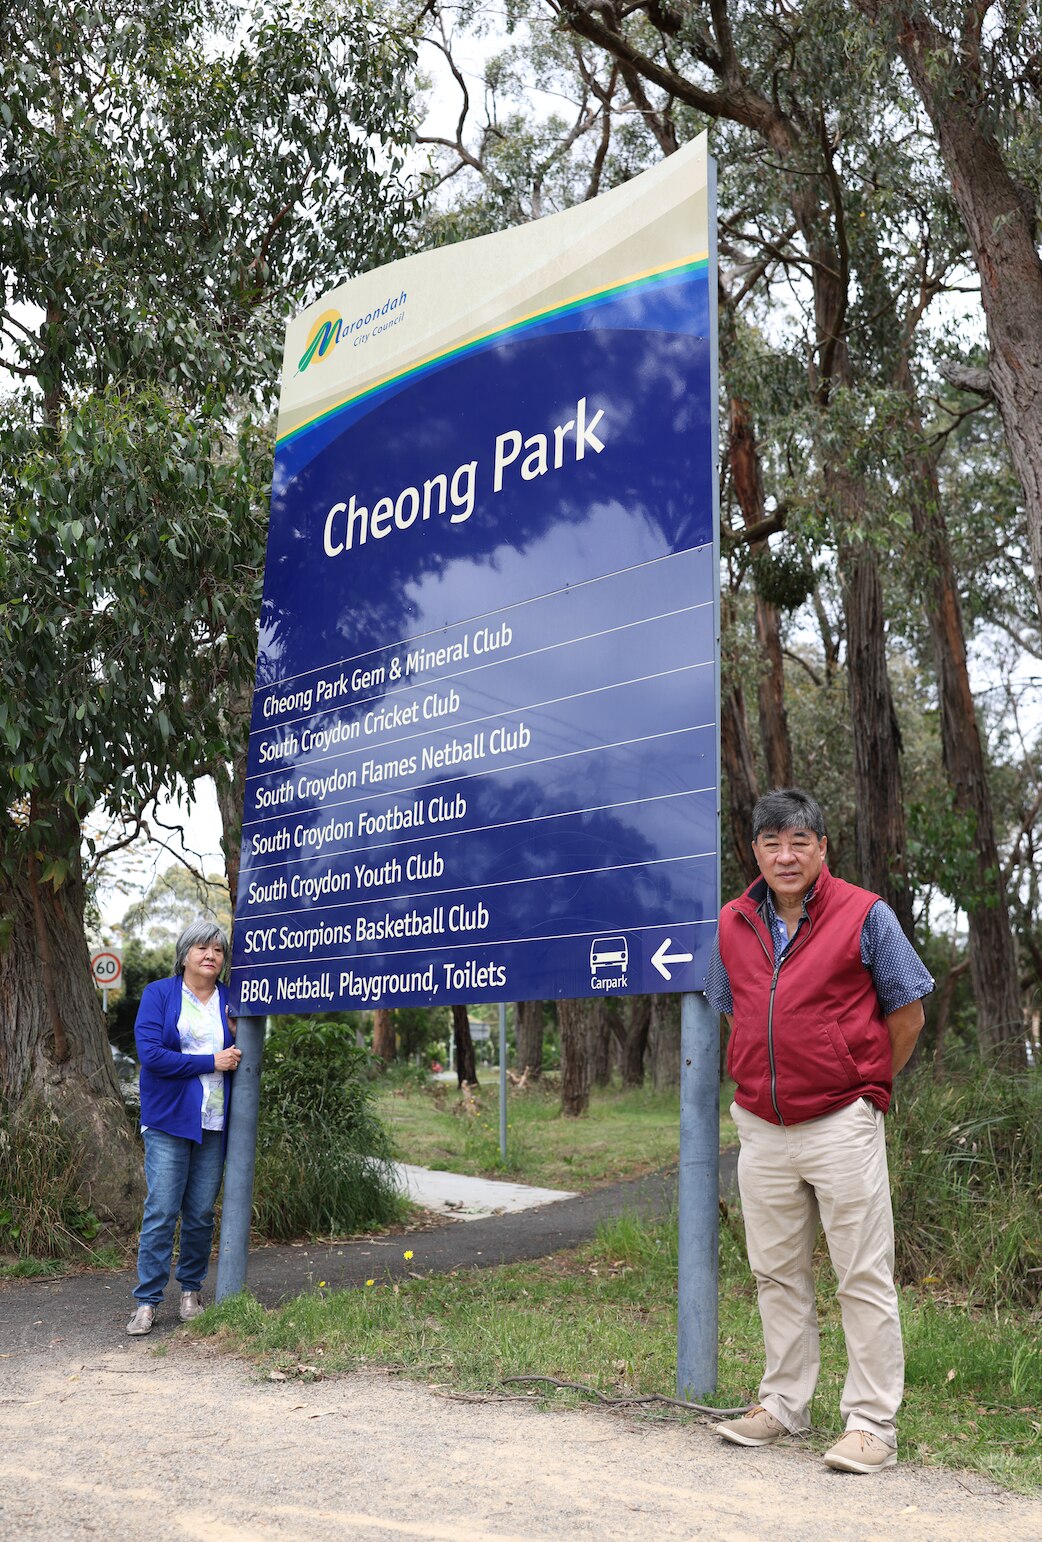 The entrance of Cheong Park with Lesley Lowe (nee Cheong) & Paul Cheong 